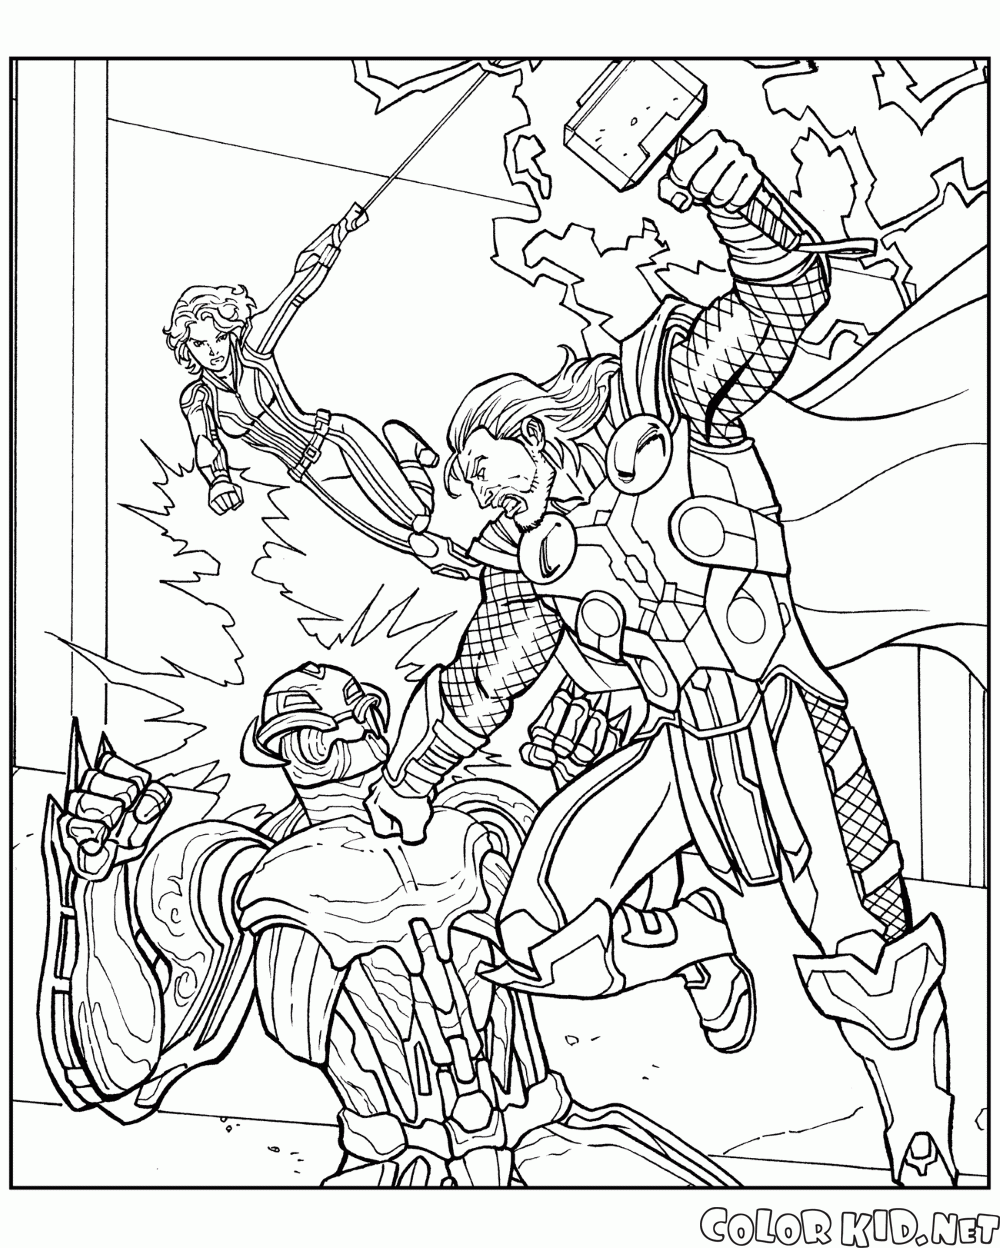 Coloring page - Scarlet Witch